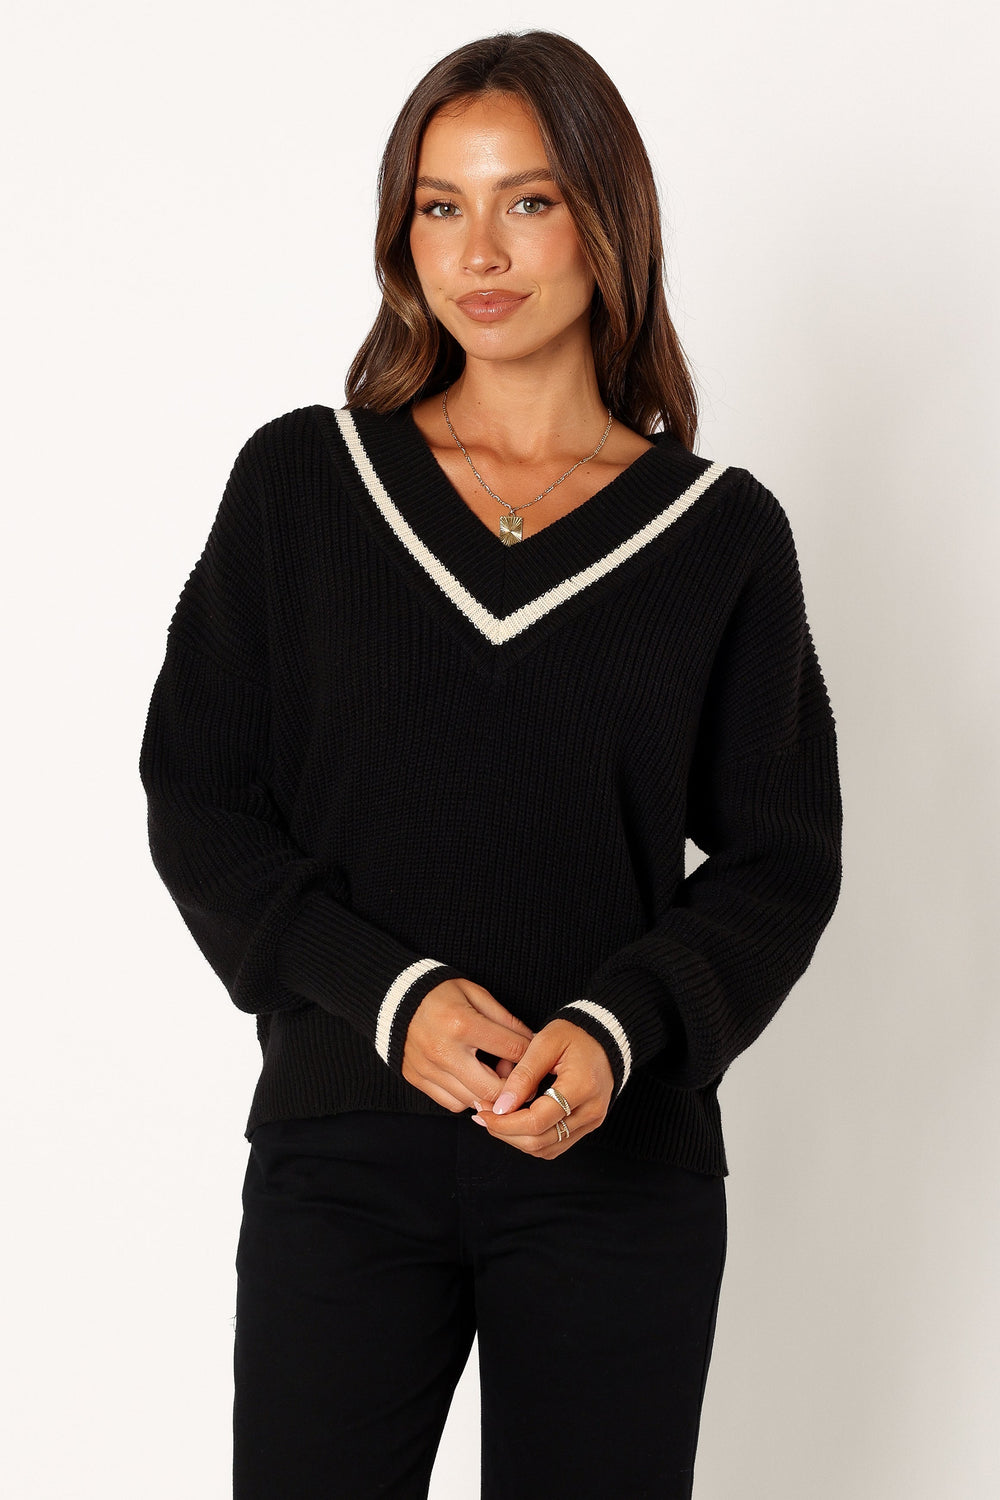 Petal and Pup USA KNITWEAR Dominique Contrast Vneck Knit Sweater - Black/Cream